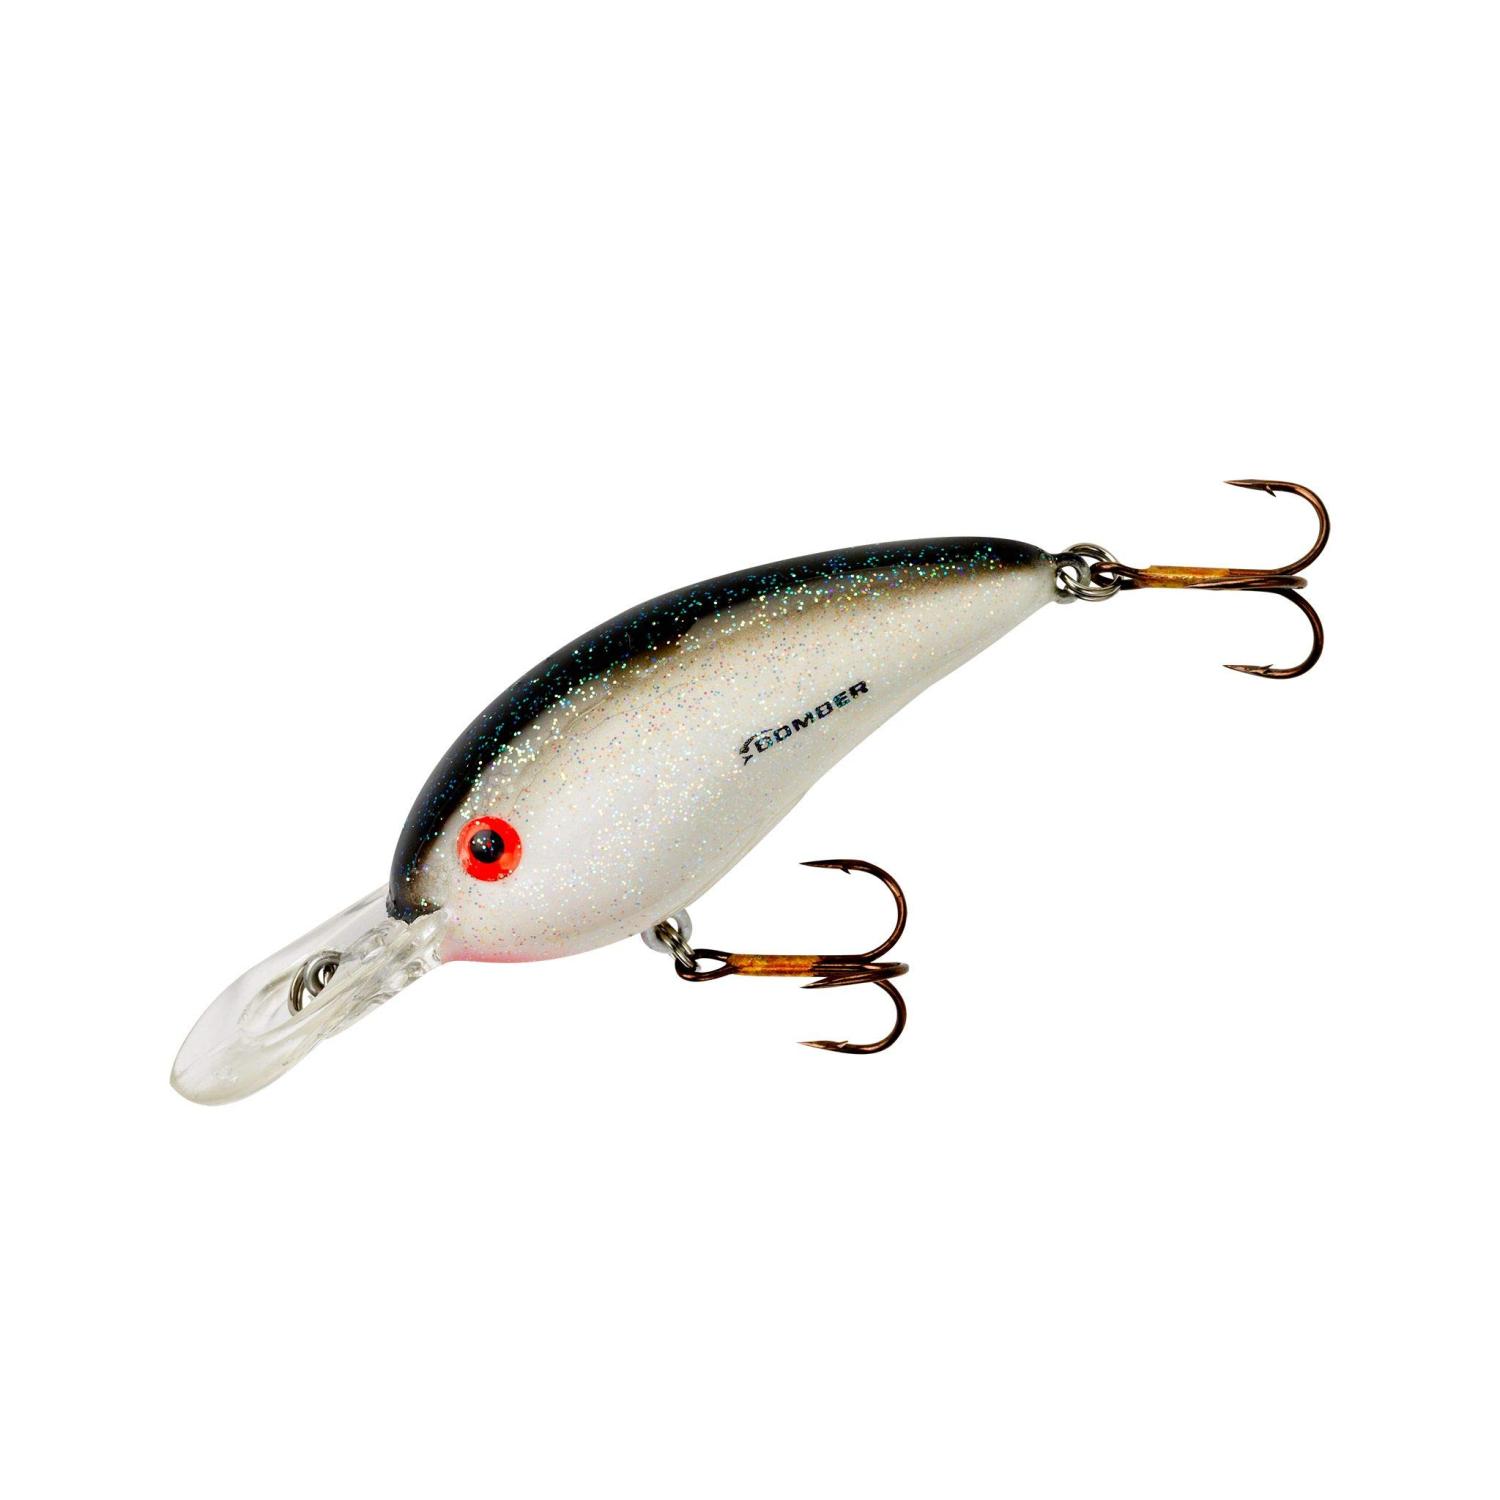  Bomber Lures Square A Crankbait Fishing Lure, Fishing Gear and  Accessories, 2, 3/8 oz, Apple Red Crawdad : Fishing Topwater Lures And  Crankbaits : Sports & Outdoors